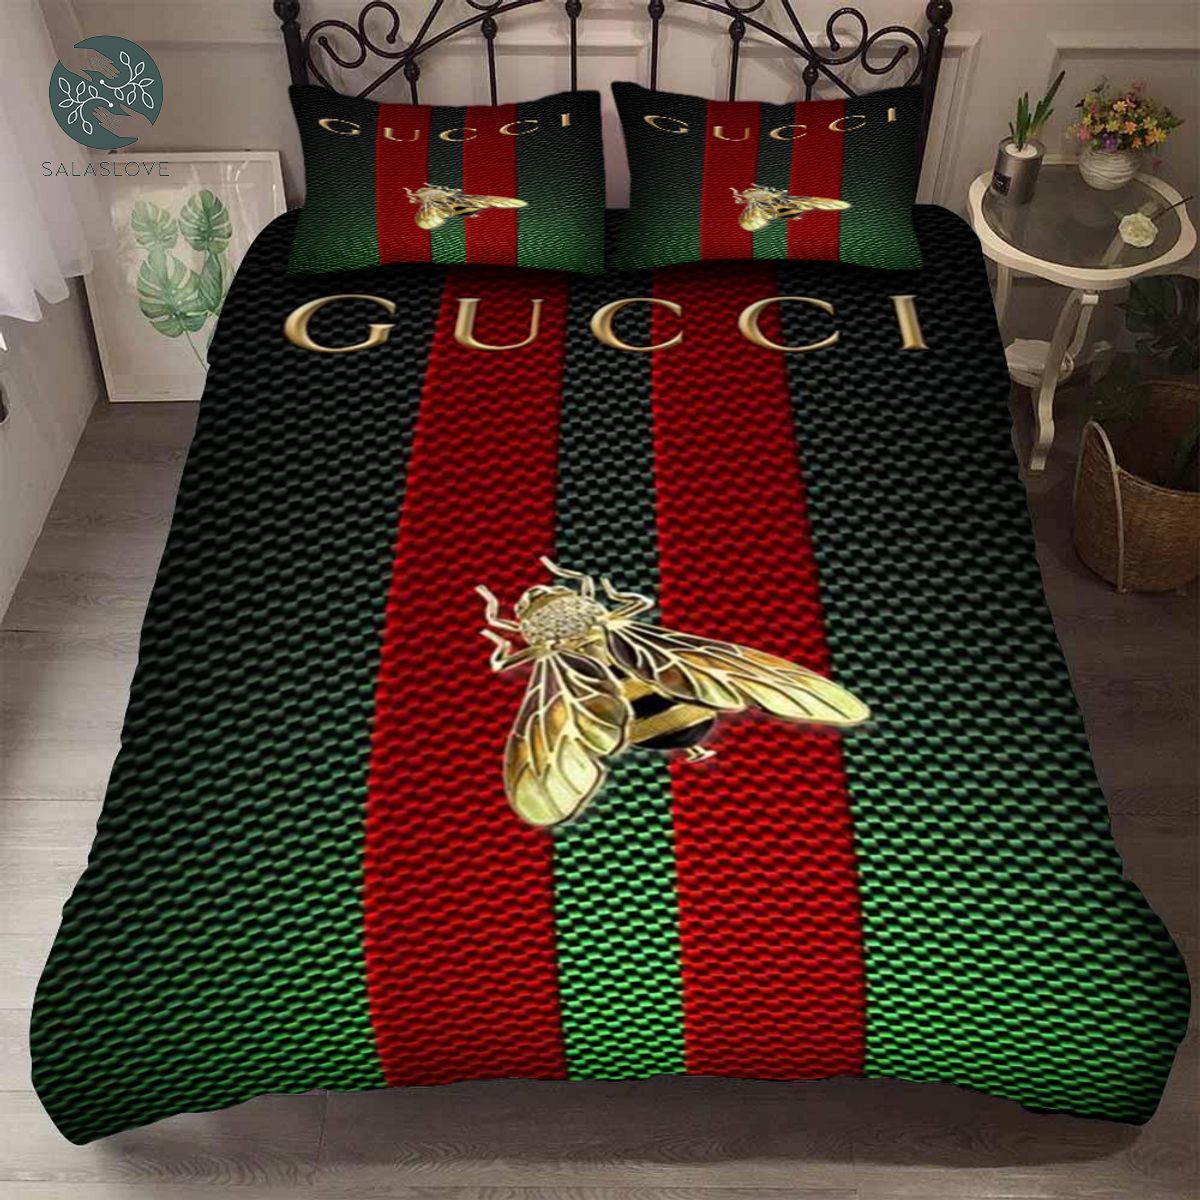 Gucci With The Bee Bedding Set Duvet Cover Bedset